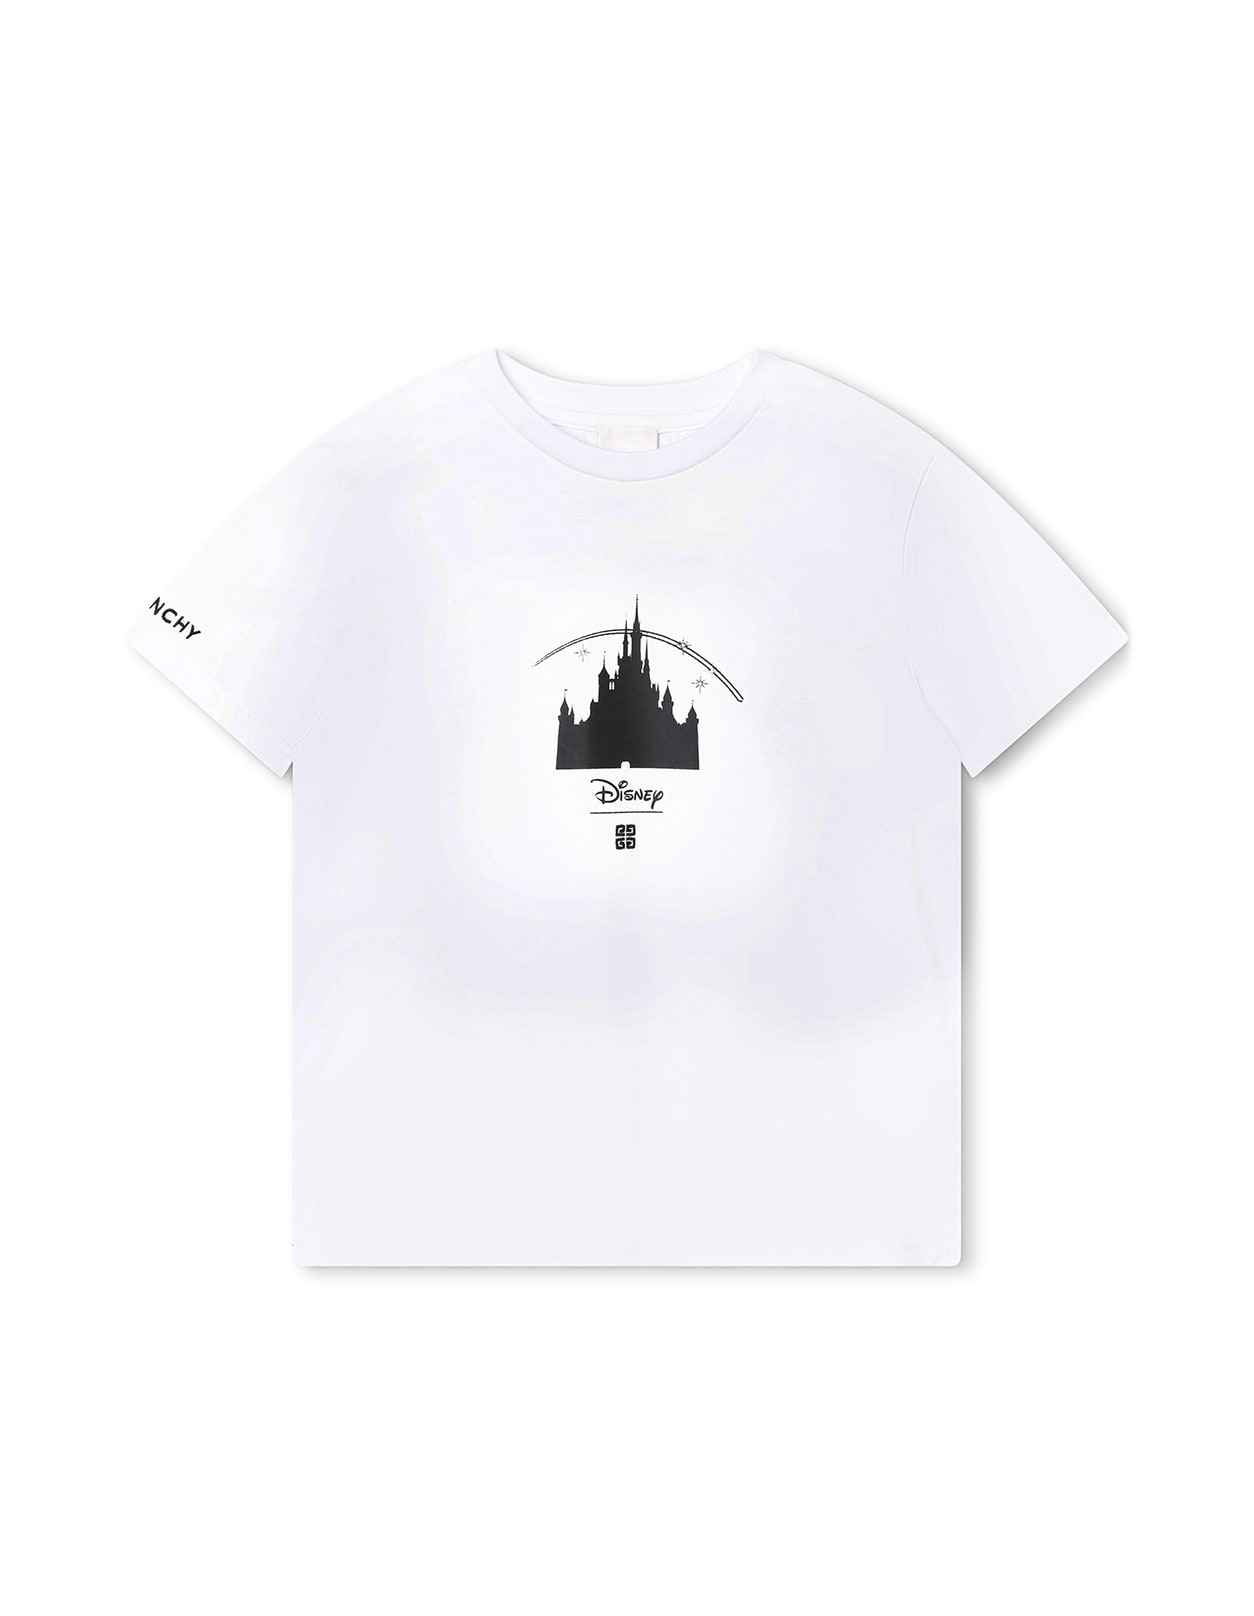 GIVENCHY WHITE T-SHIRT WITH OSWALD PRINT AND DISNEY CASTLE